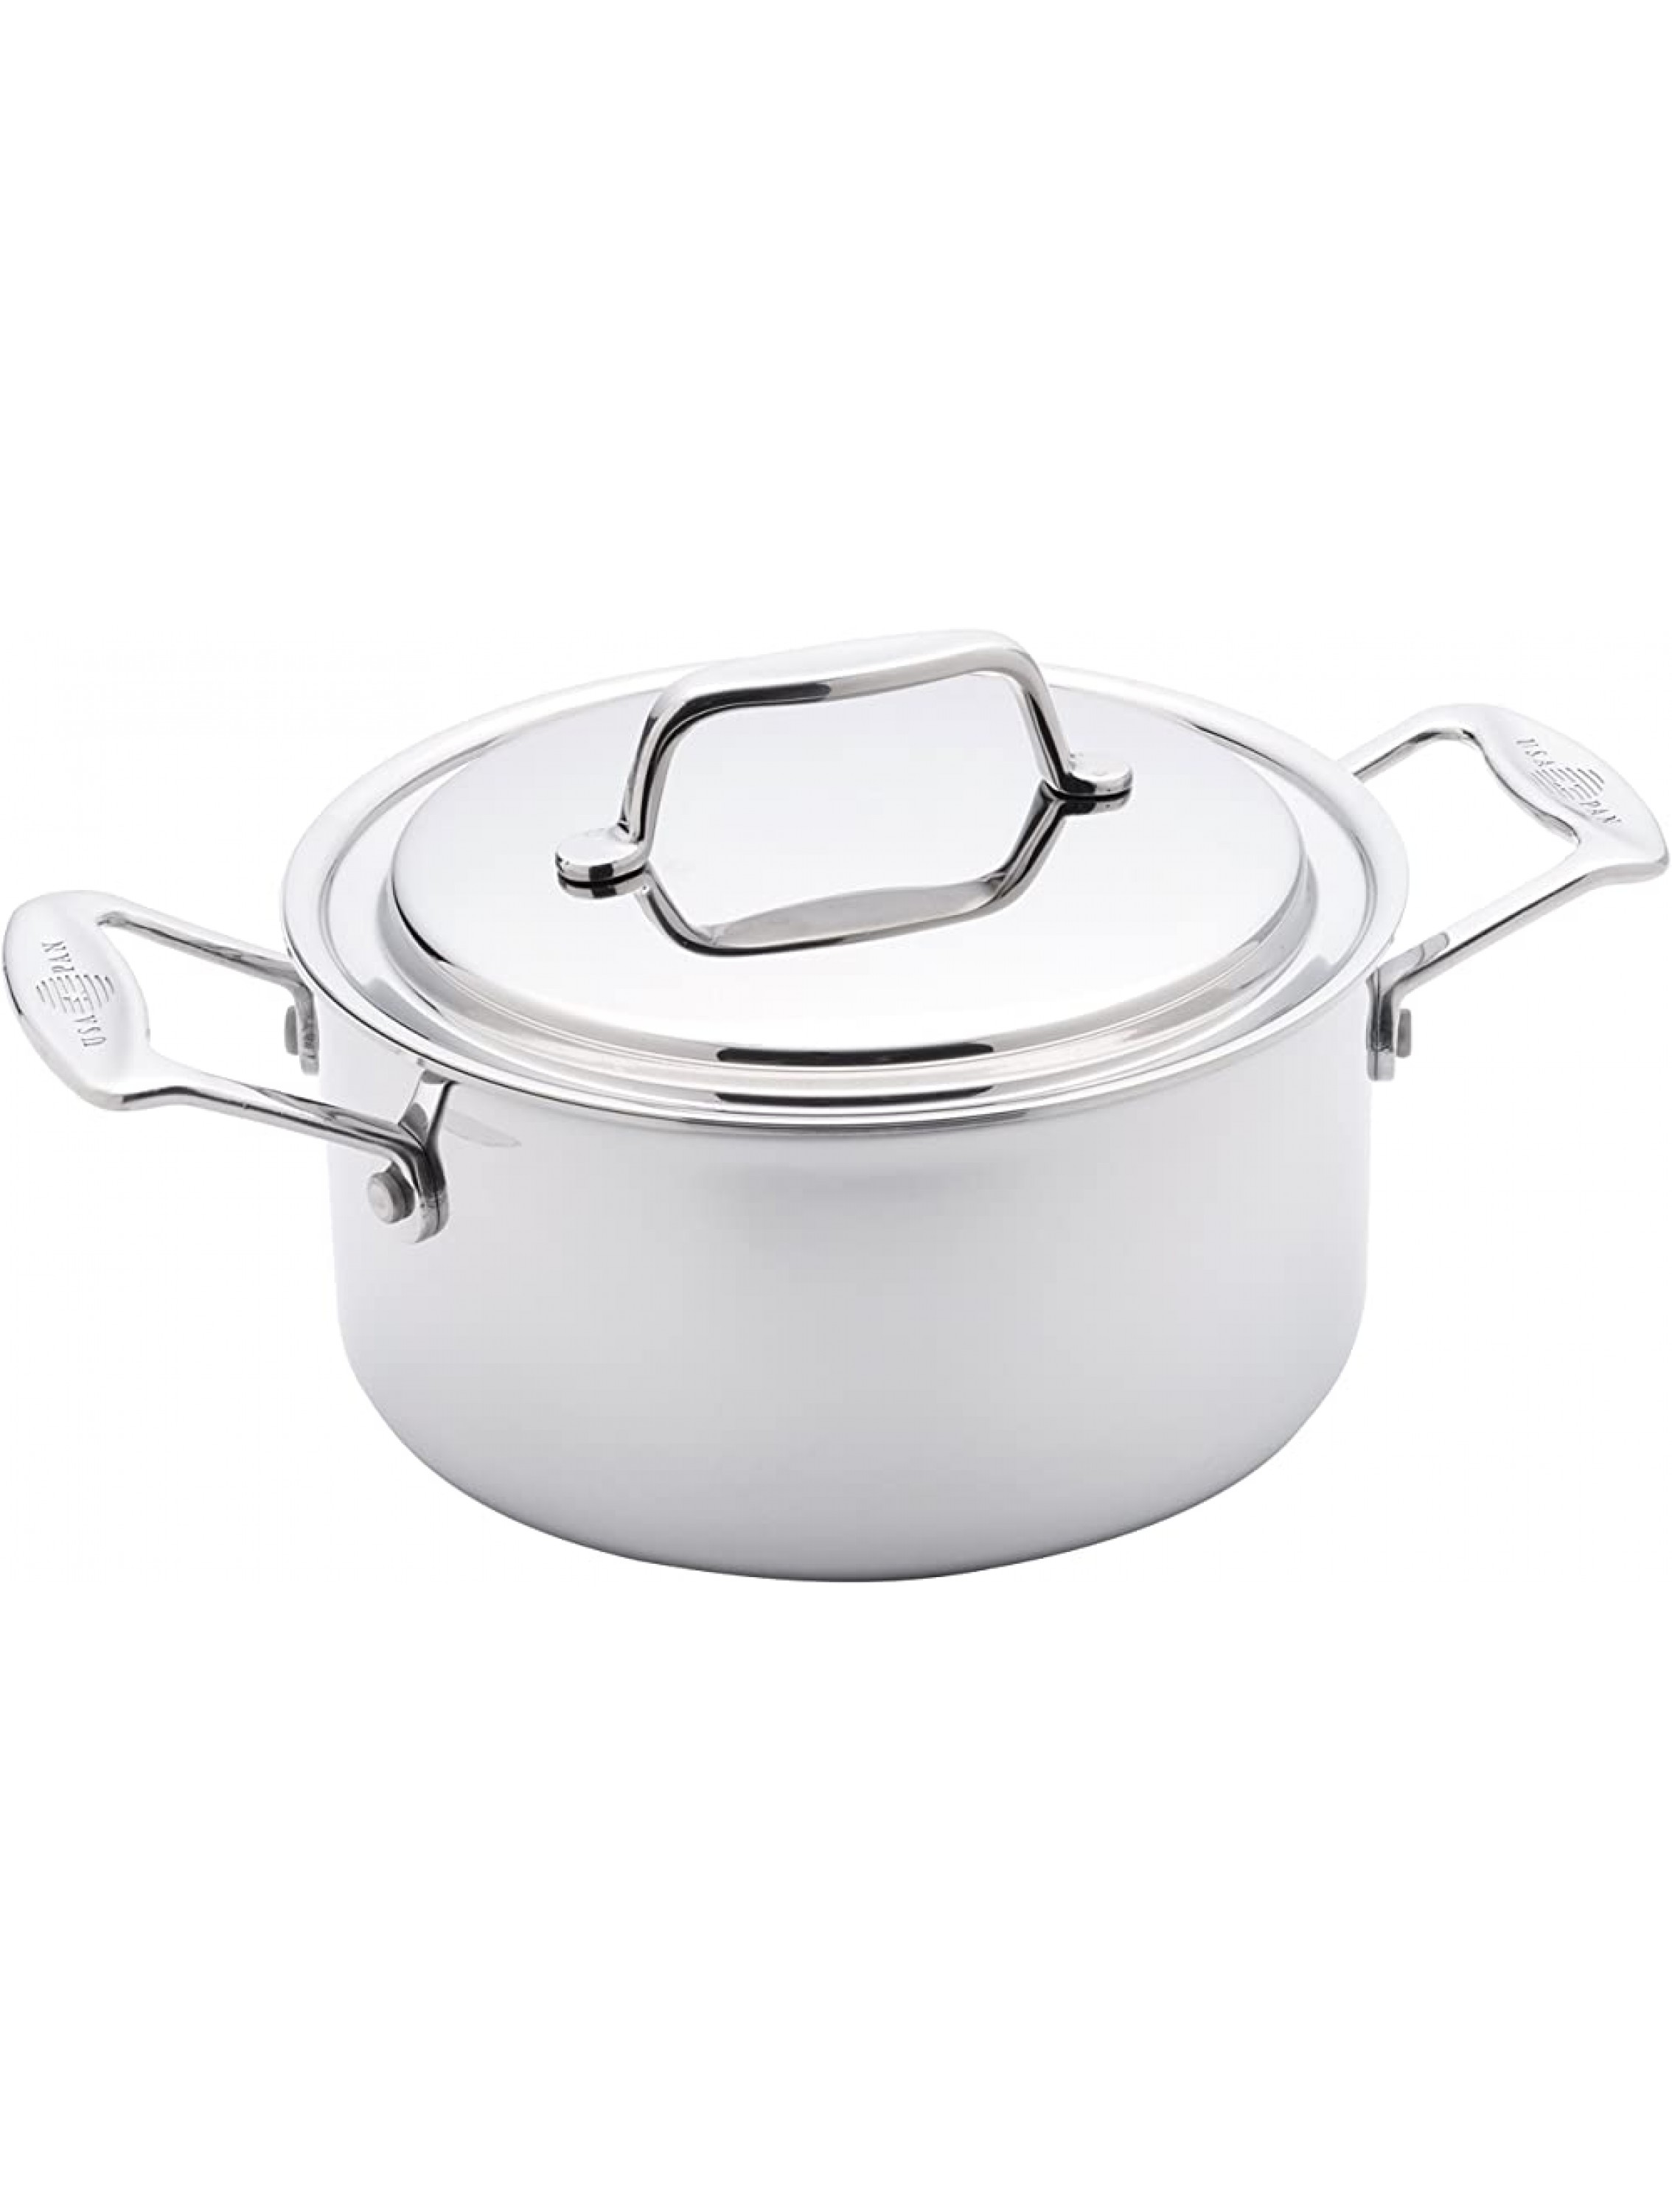 USA Pan Cookware 5-Ply Stainless Steel 3 Quart Stock Pot with Cover Oven and Dishwasher Safe Made in the USA Silver - BMH3ENPJA